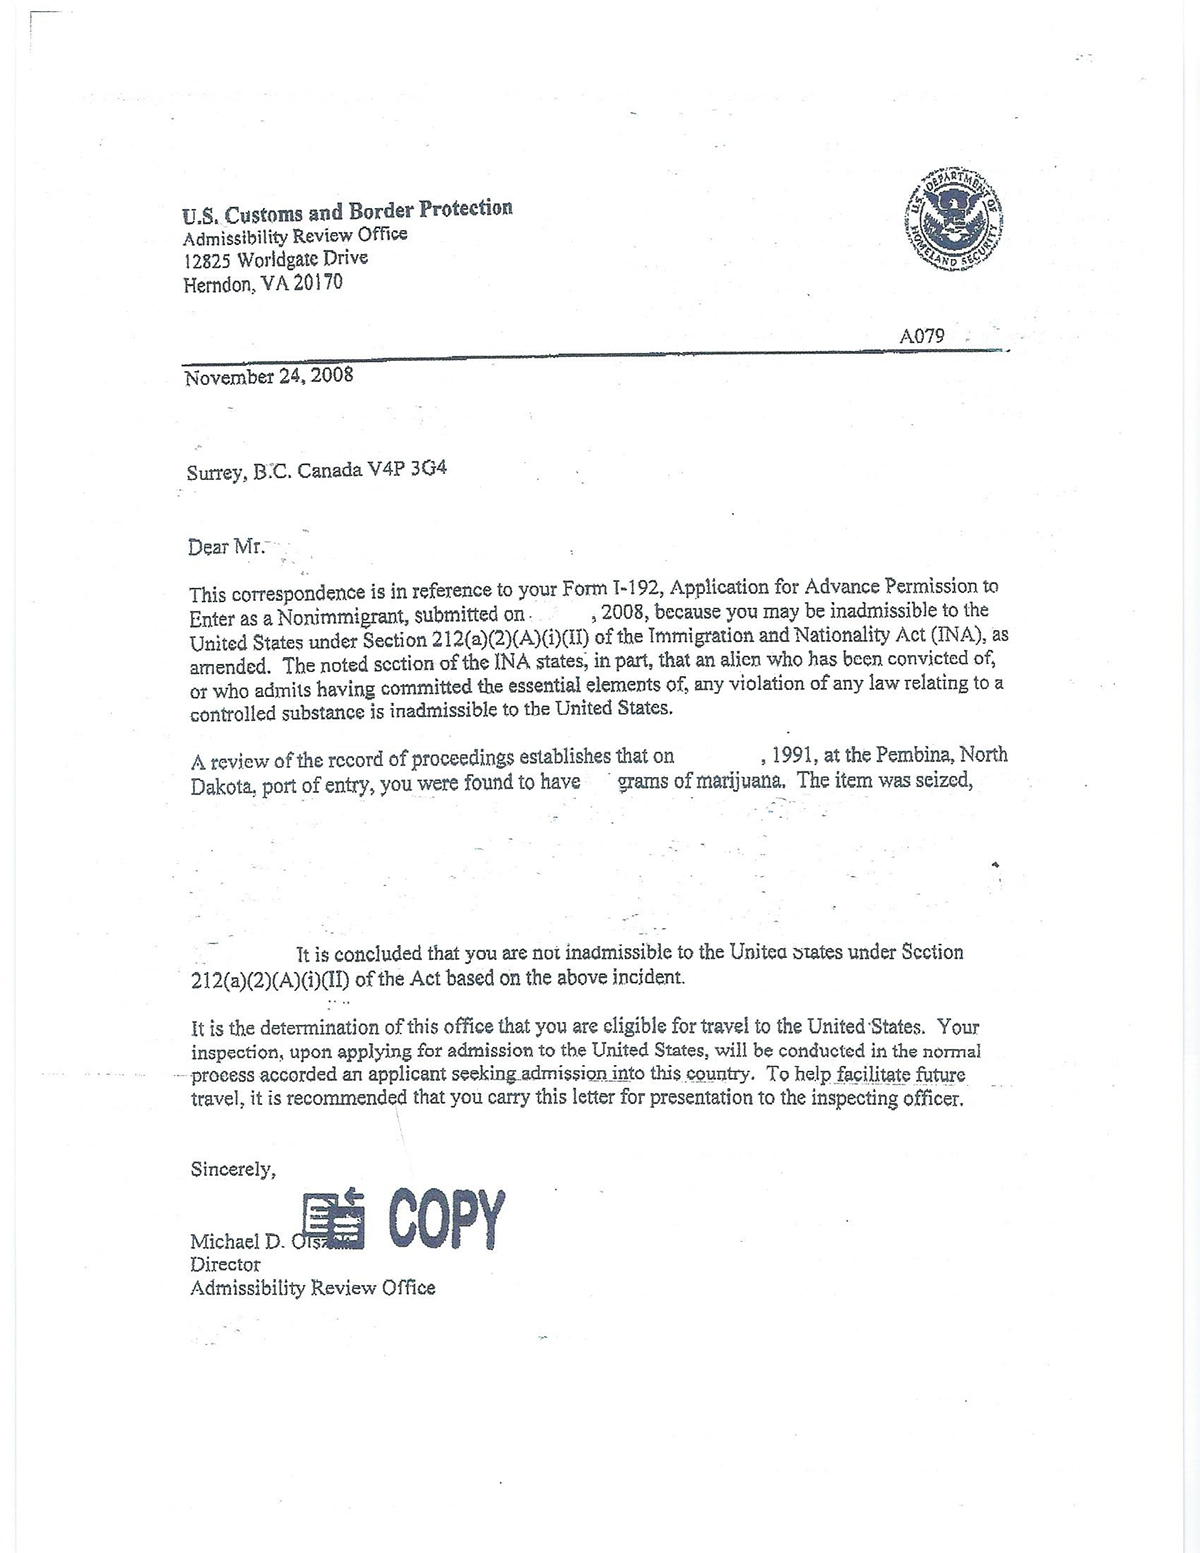 Permanent Clearance / September Letter - US ENTRY WAIVER SERVICES 2022